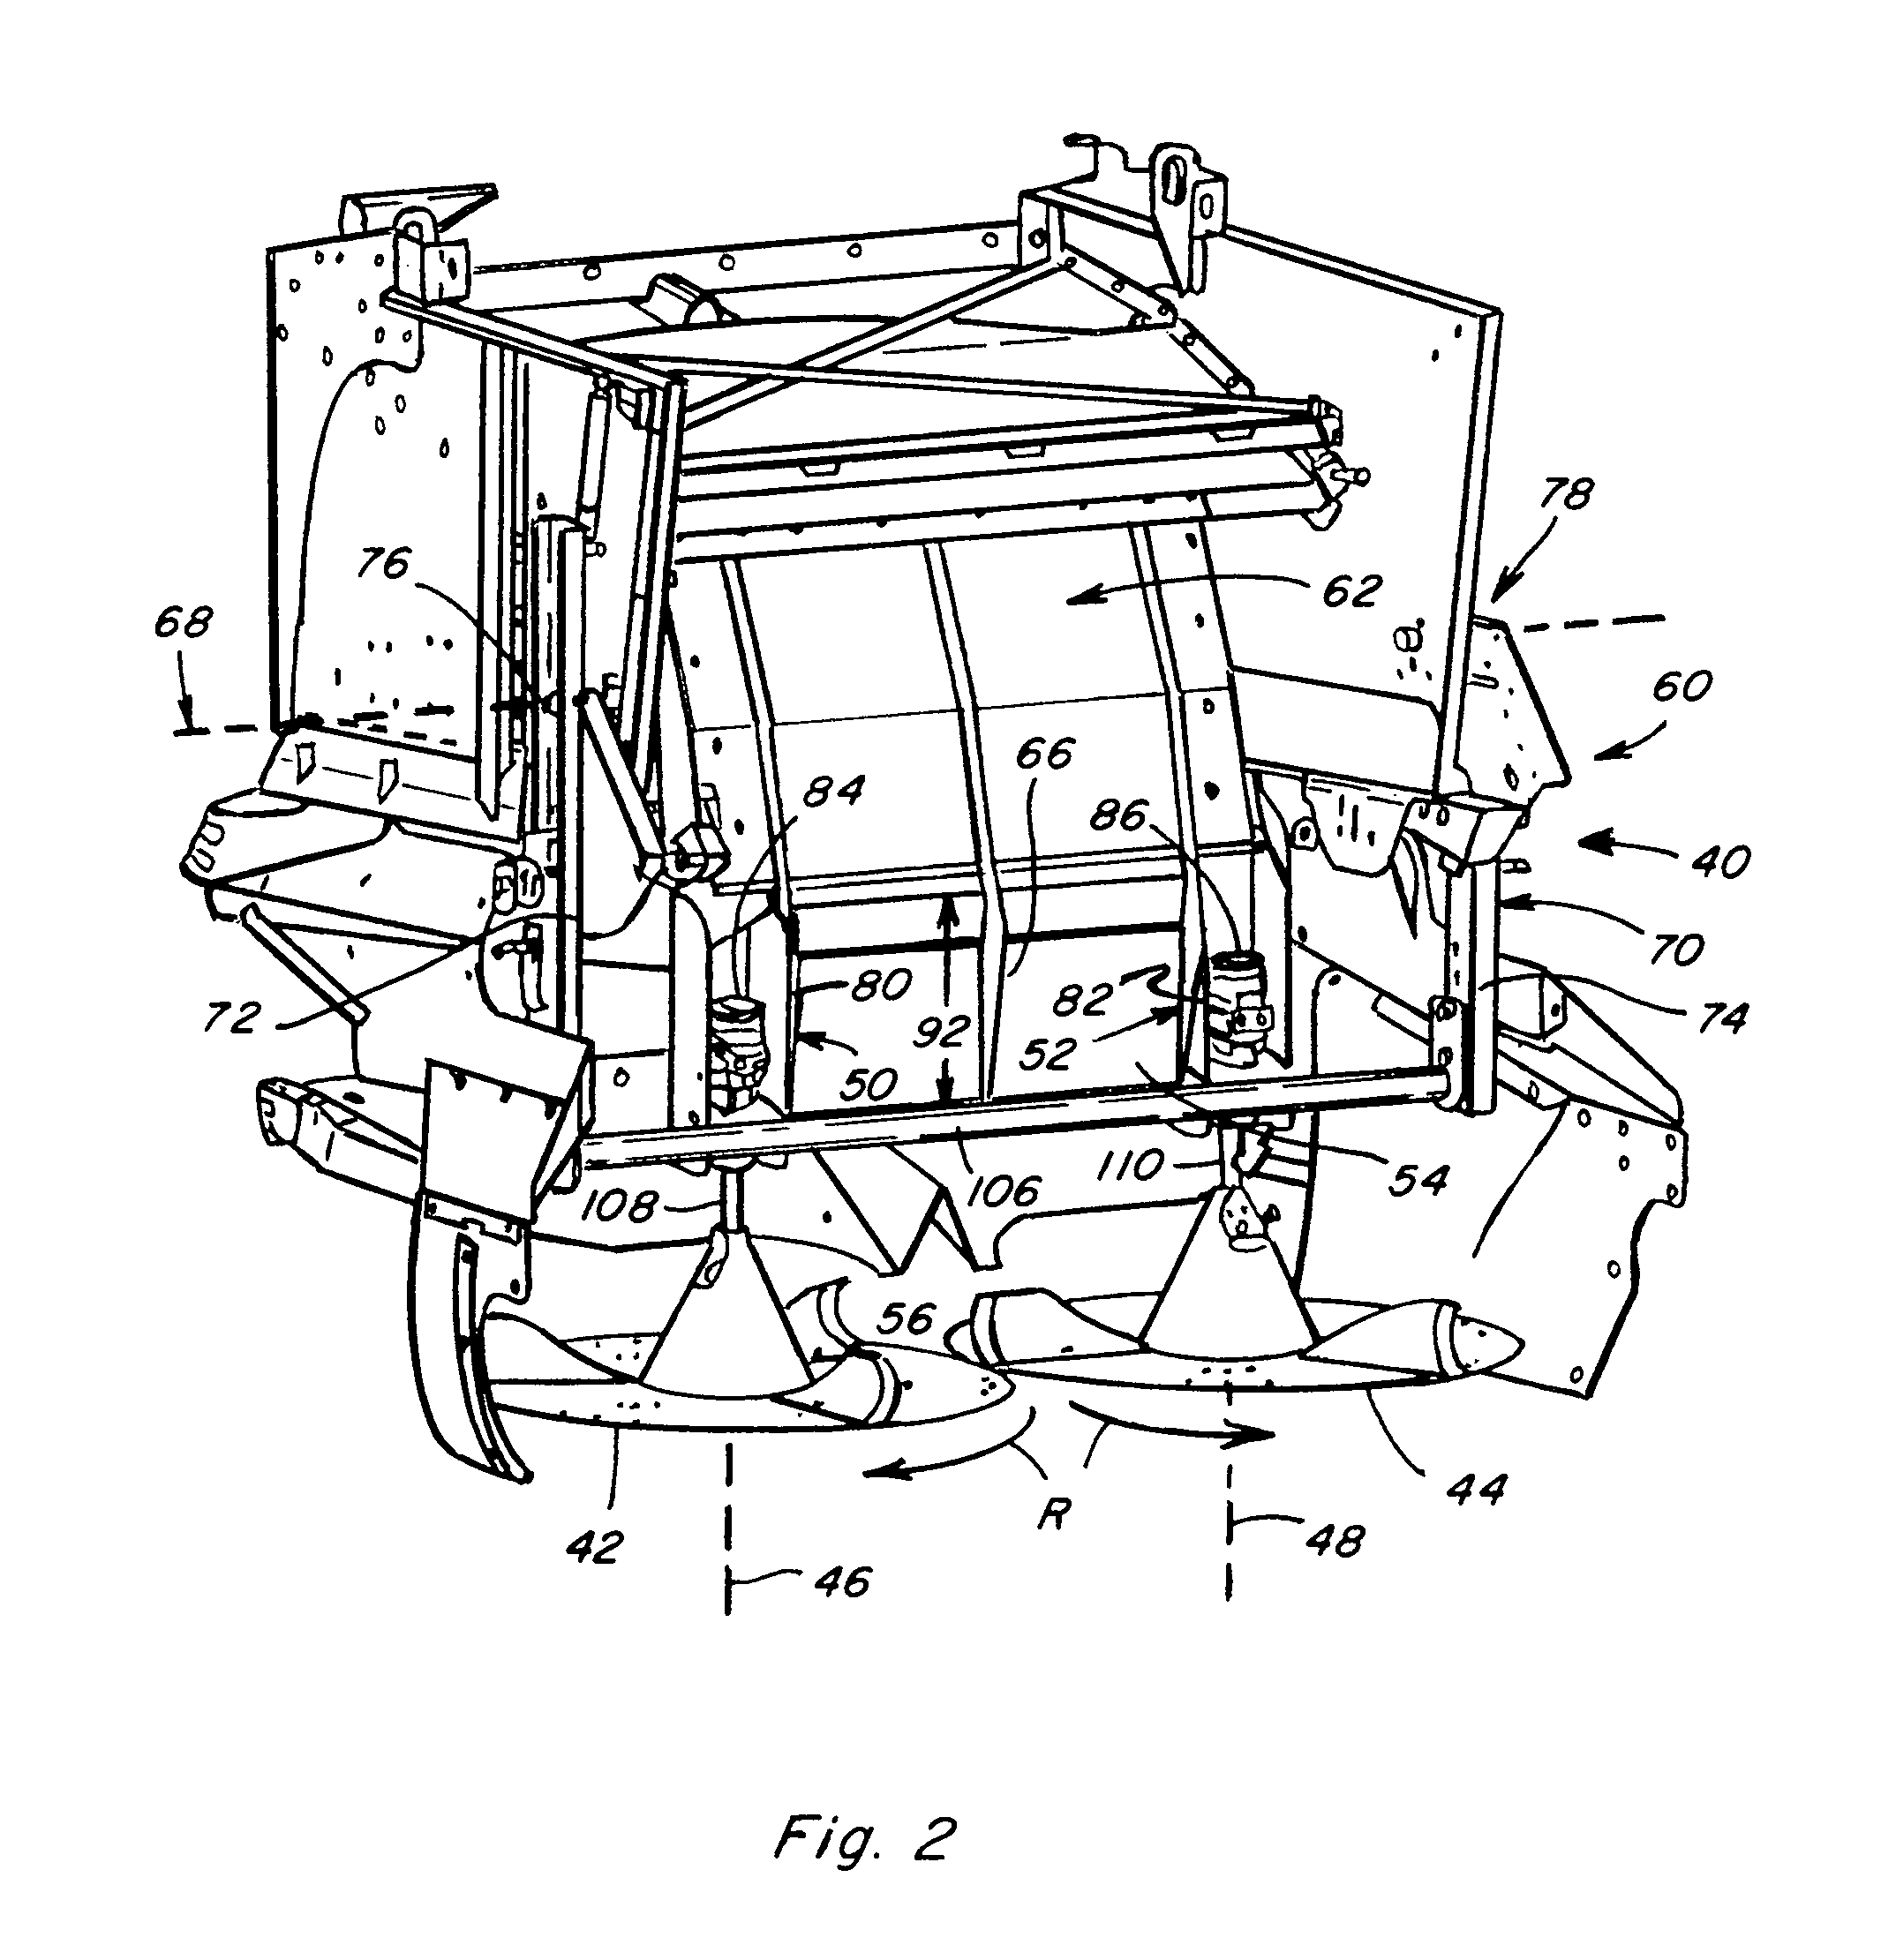 Crop residue distribution apparatus and system with cooperatively movable deflector door and spreader assembly